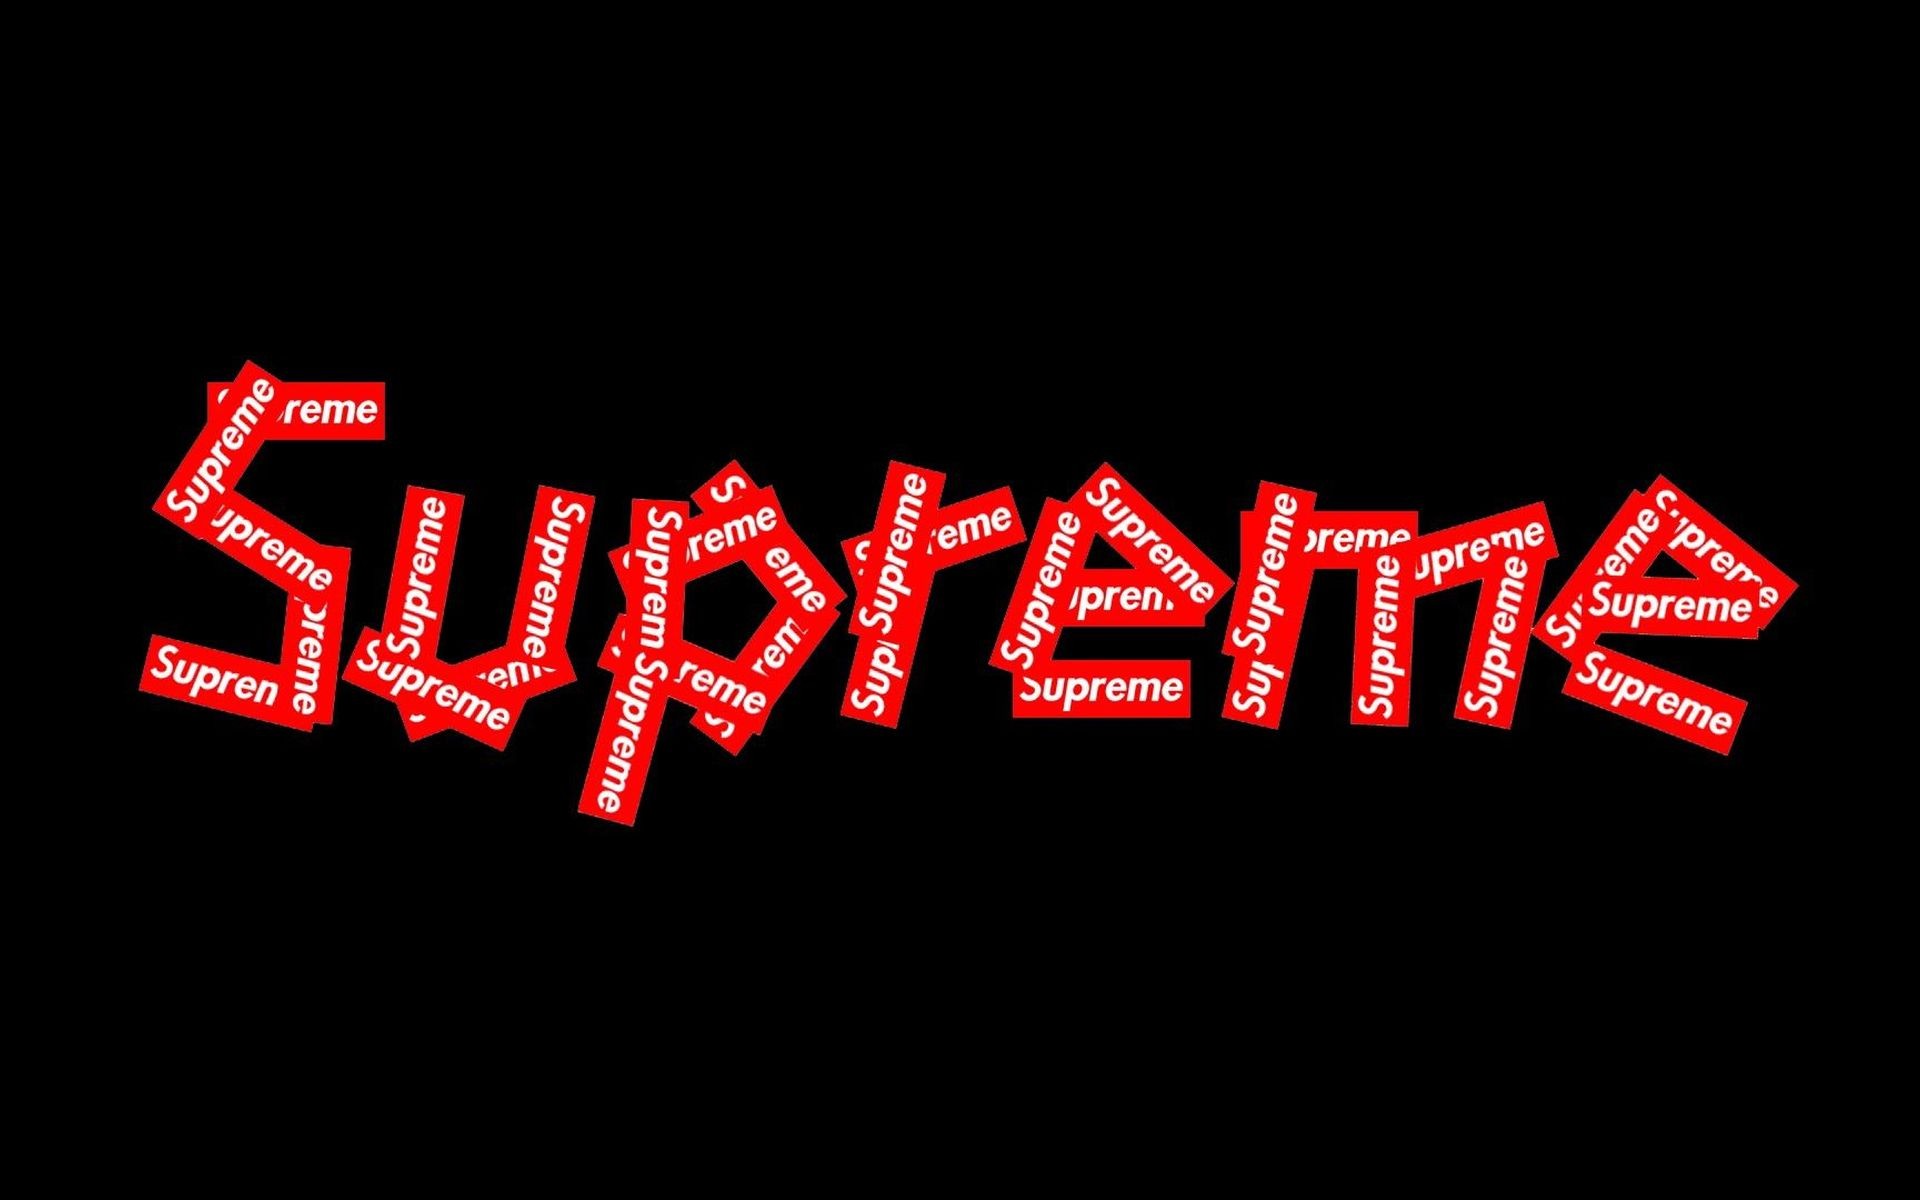  Supreme  background   Download free backgrounds  for 